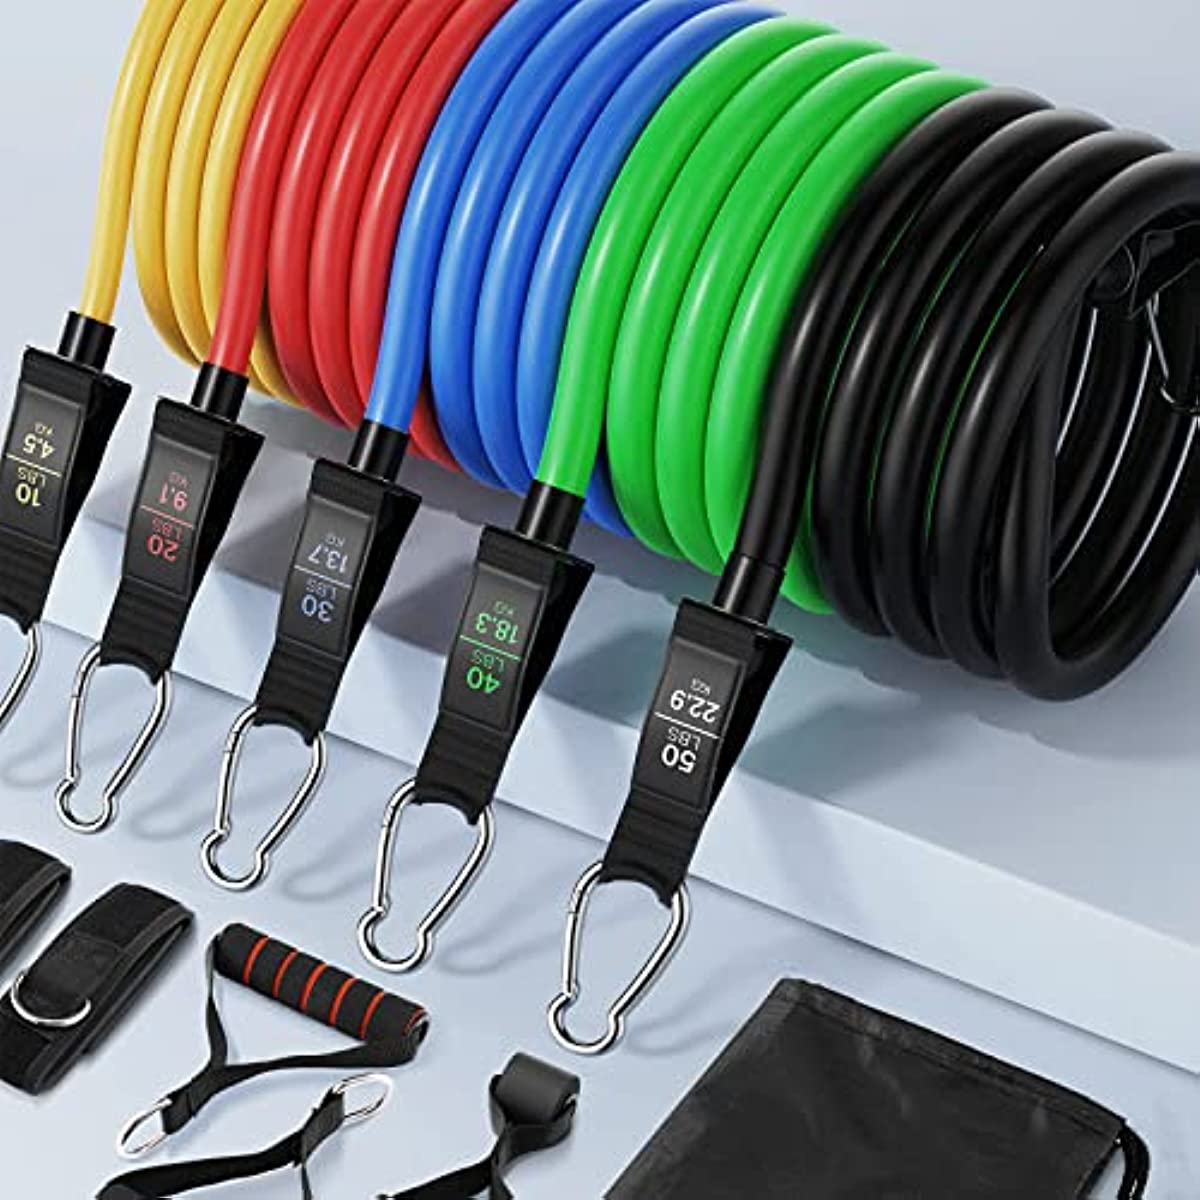 NECOTT Resistance Bands Set with Handles, Professional Exercise Bands with Upgraded Material, Max Workout for 150lbs, Physical Therapy Bands with Door Anchor, Handles, Legs Ankle Straps and Carry Bag